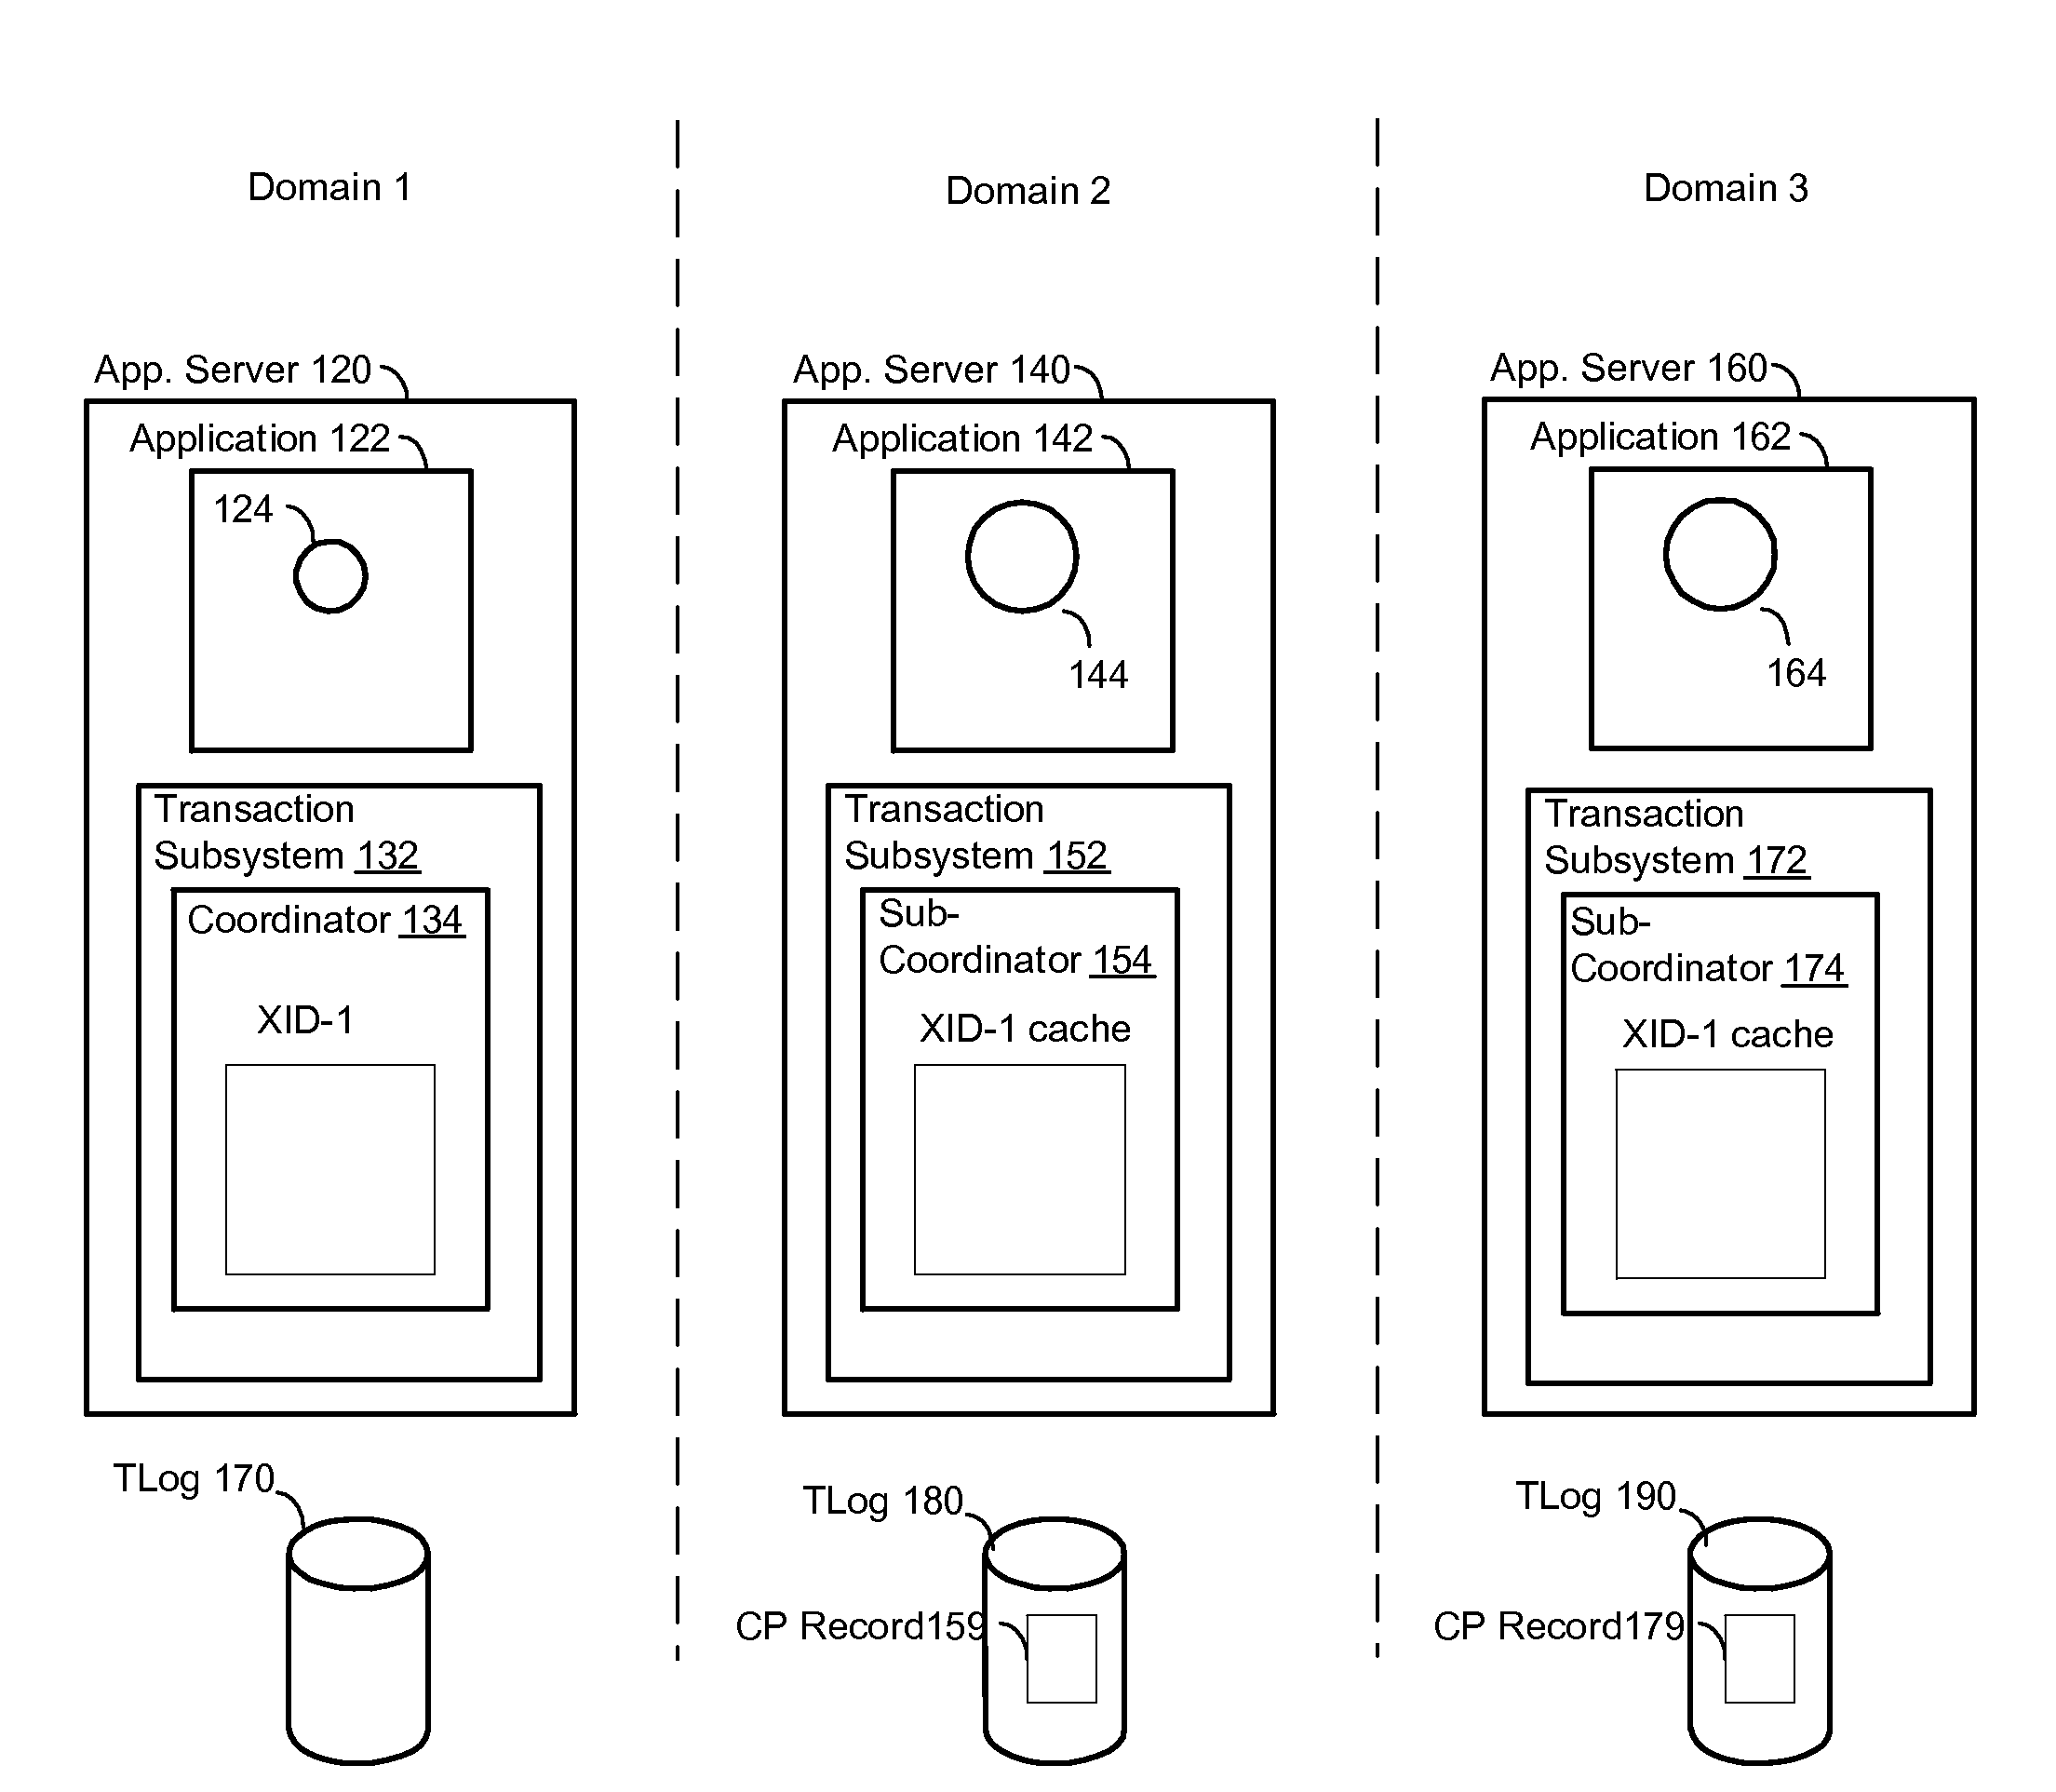 Systems and methods for mutually authenticated transaction coordination messages over insecure connections